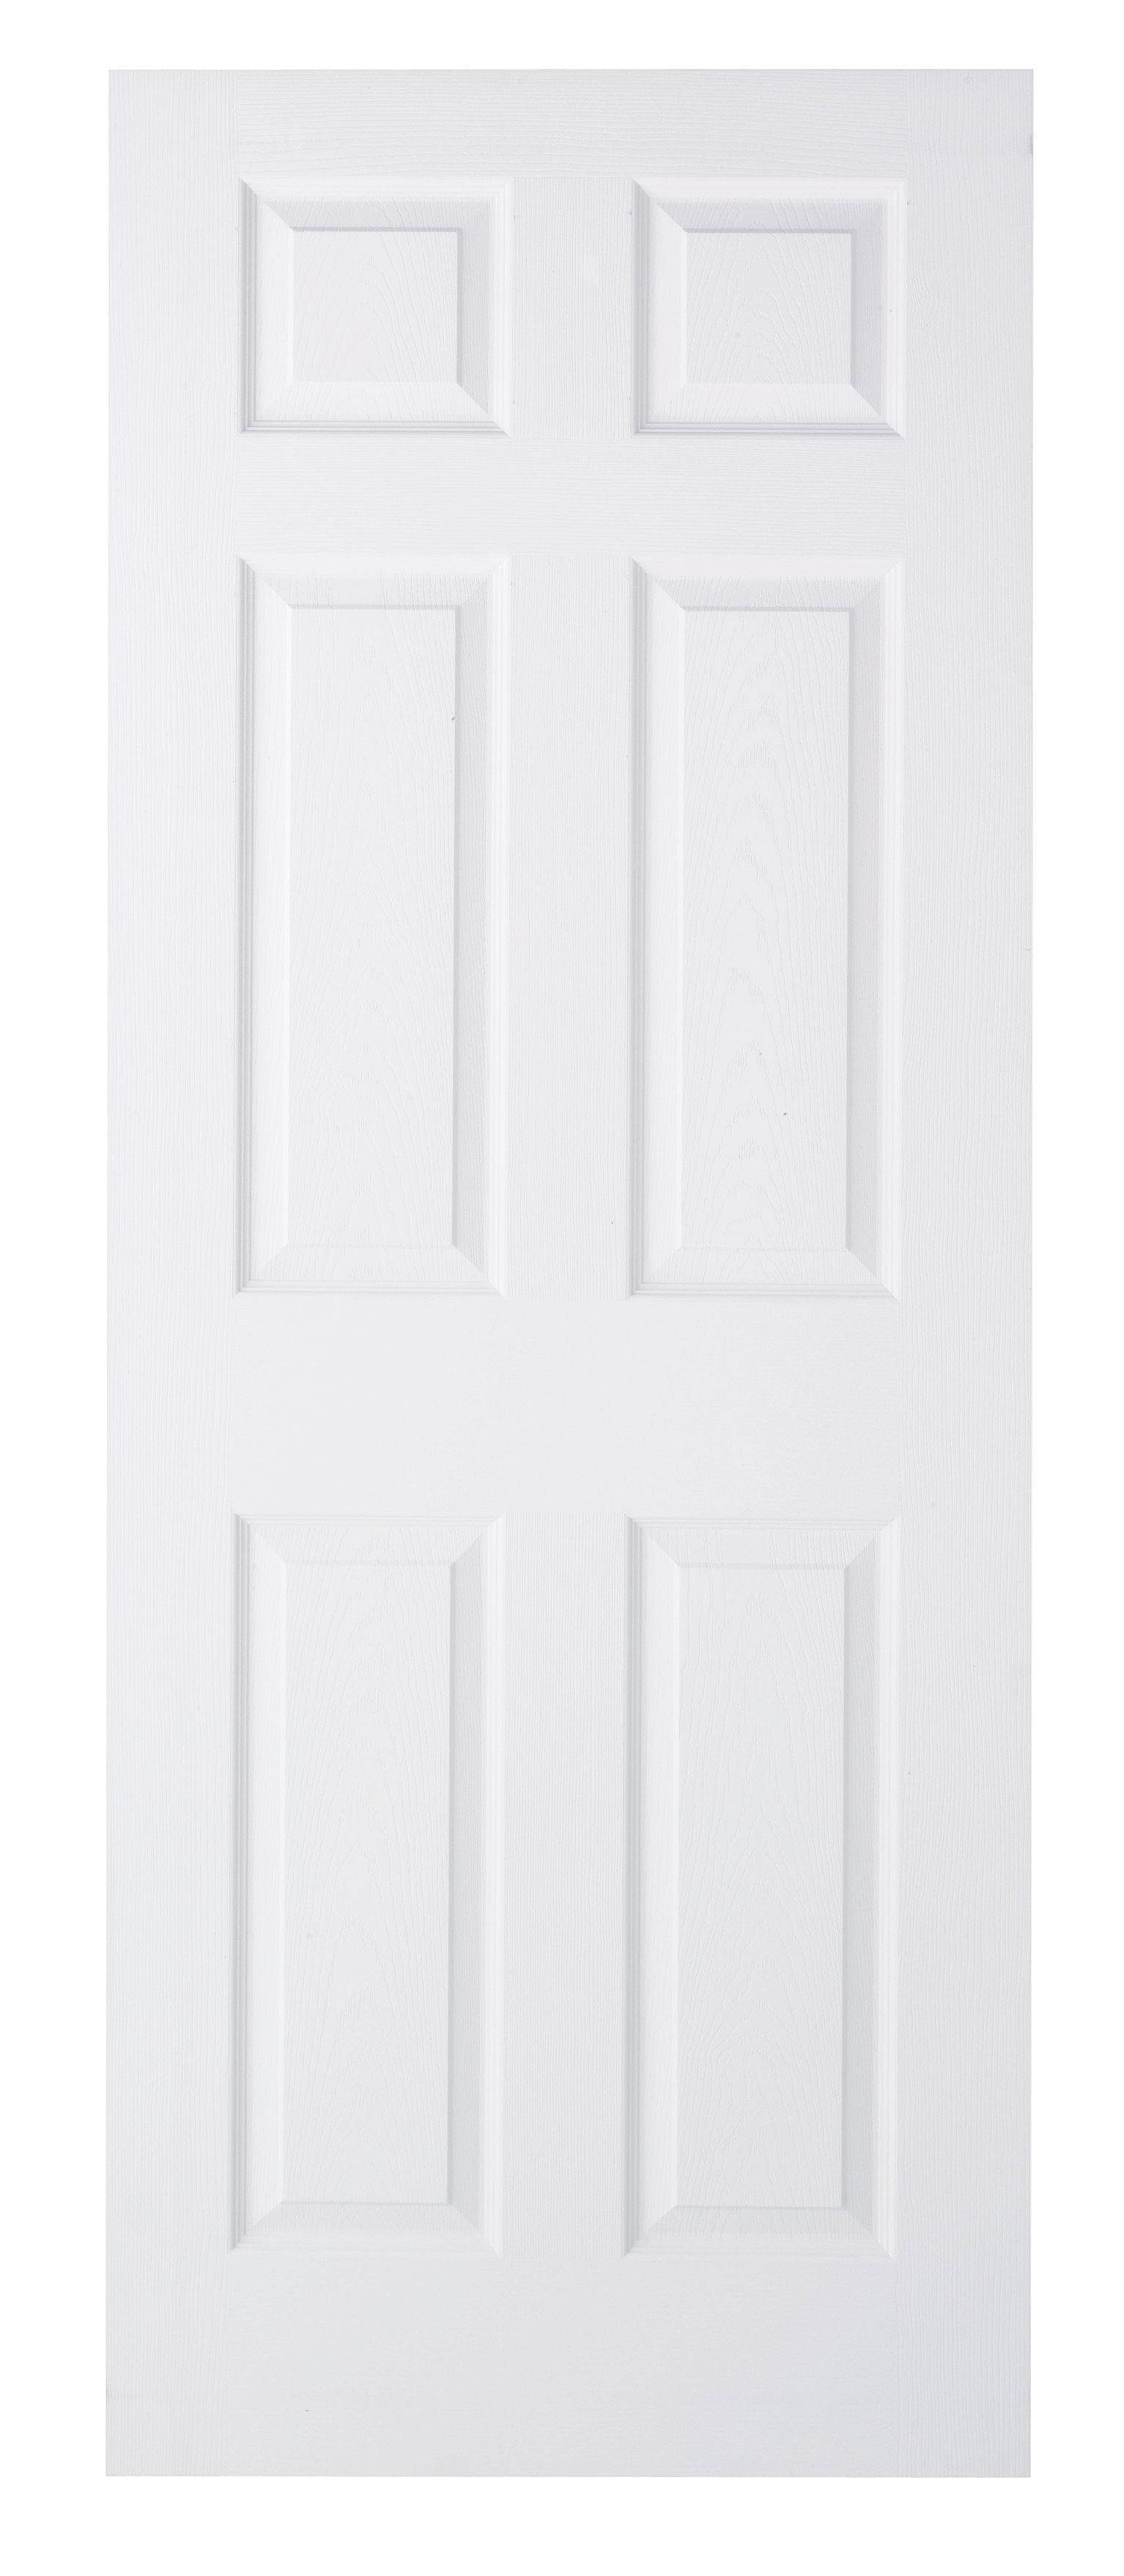 Wickes Lincoln White Grained Moulded 6 Panel Internal Door - 2040 mm